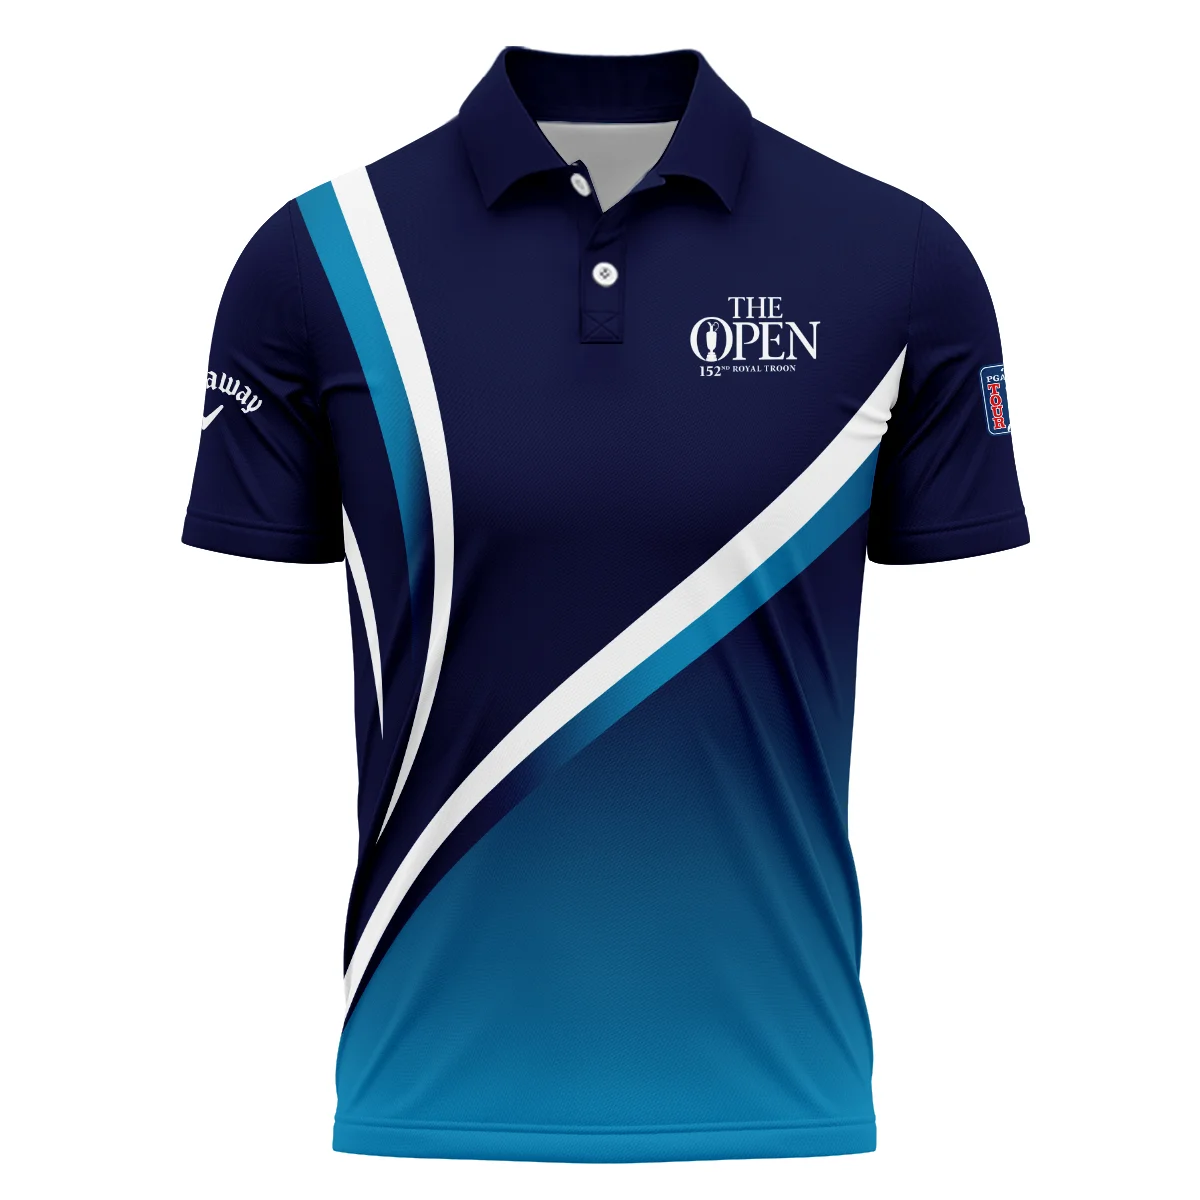 Callaway 152nd Open Championship Dark Blue Gradient White Abstract Background Vneck Polo Shirt All Over Prints  HOTOP260624A03CLWZVPL